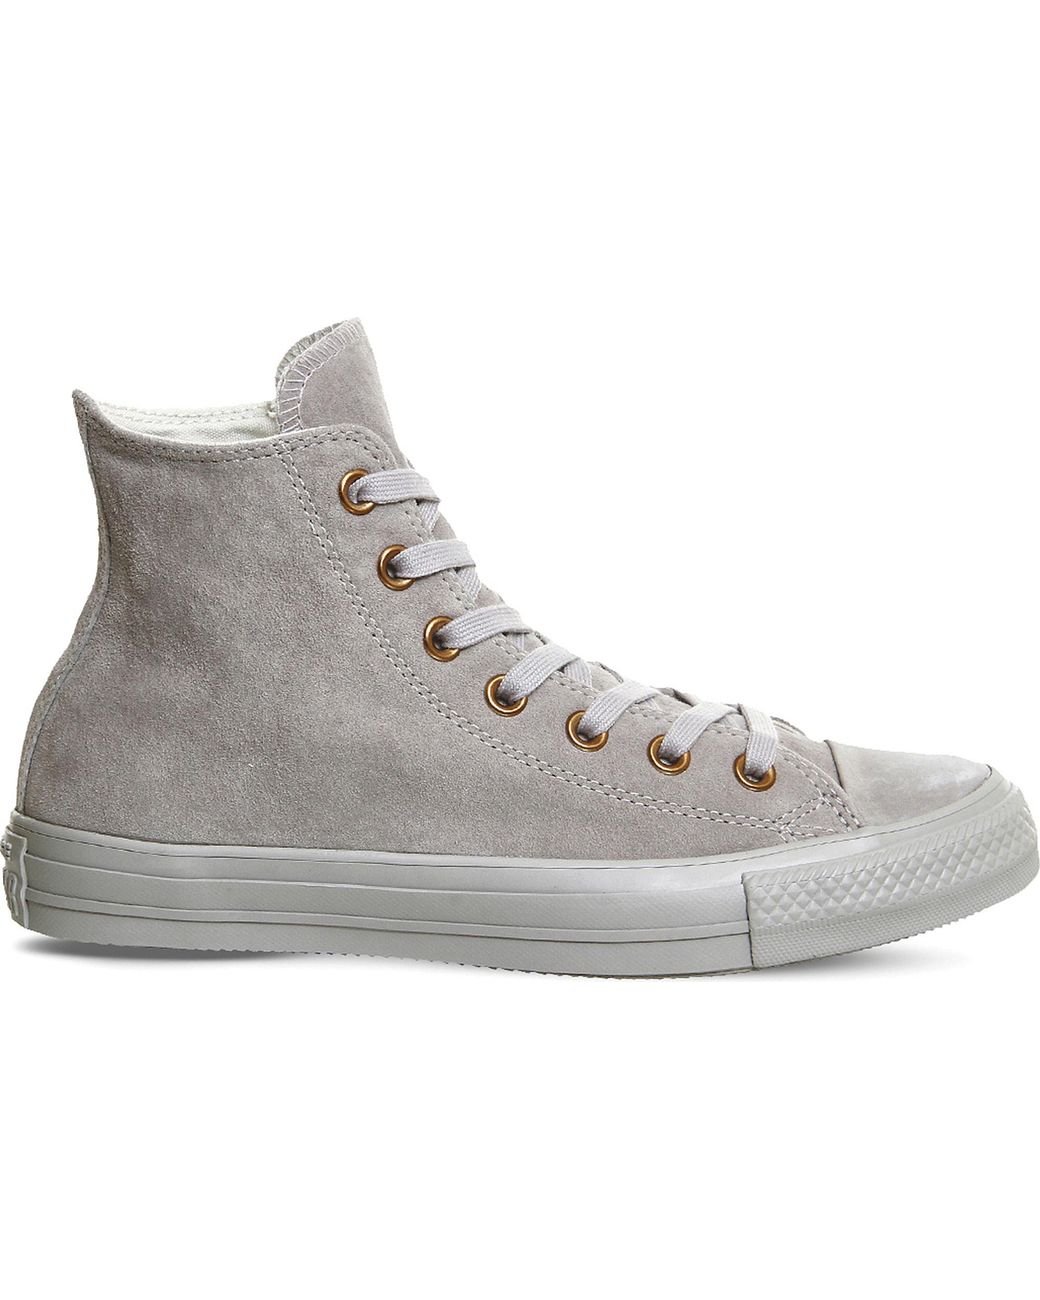 Converse All Star Hi Suede Trainers in Gray | Lyst